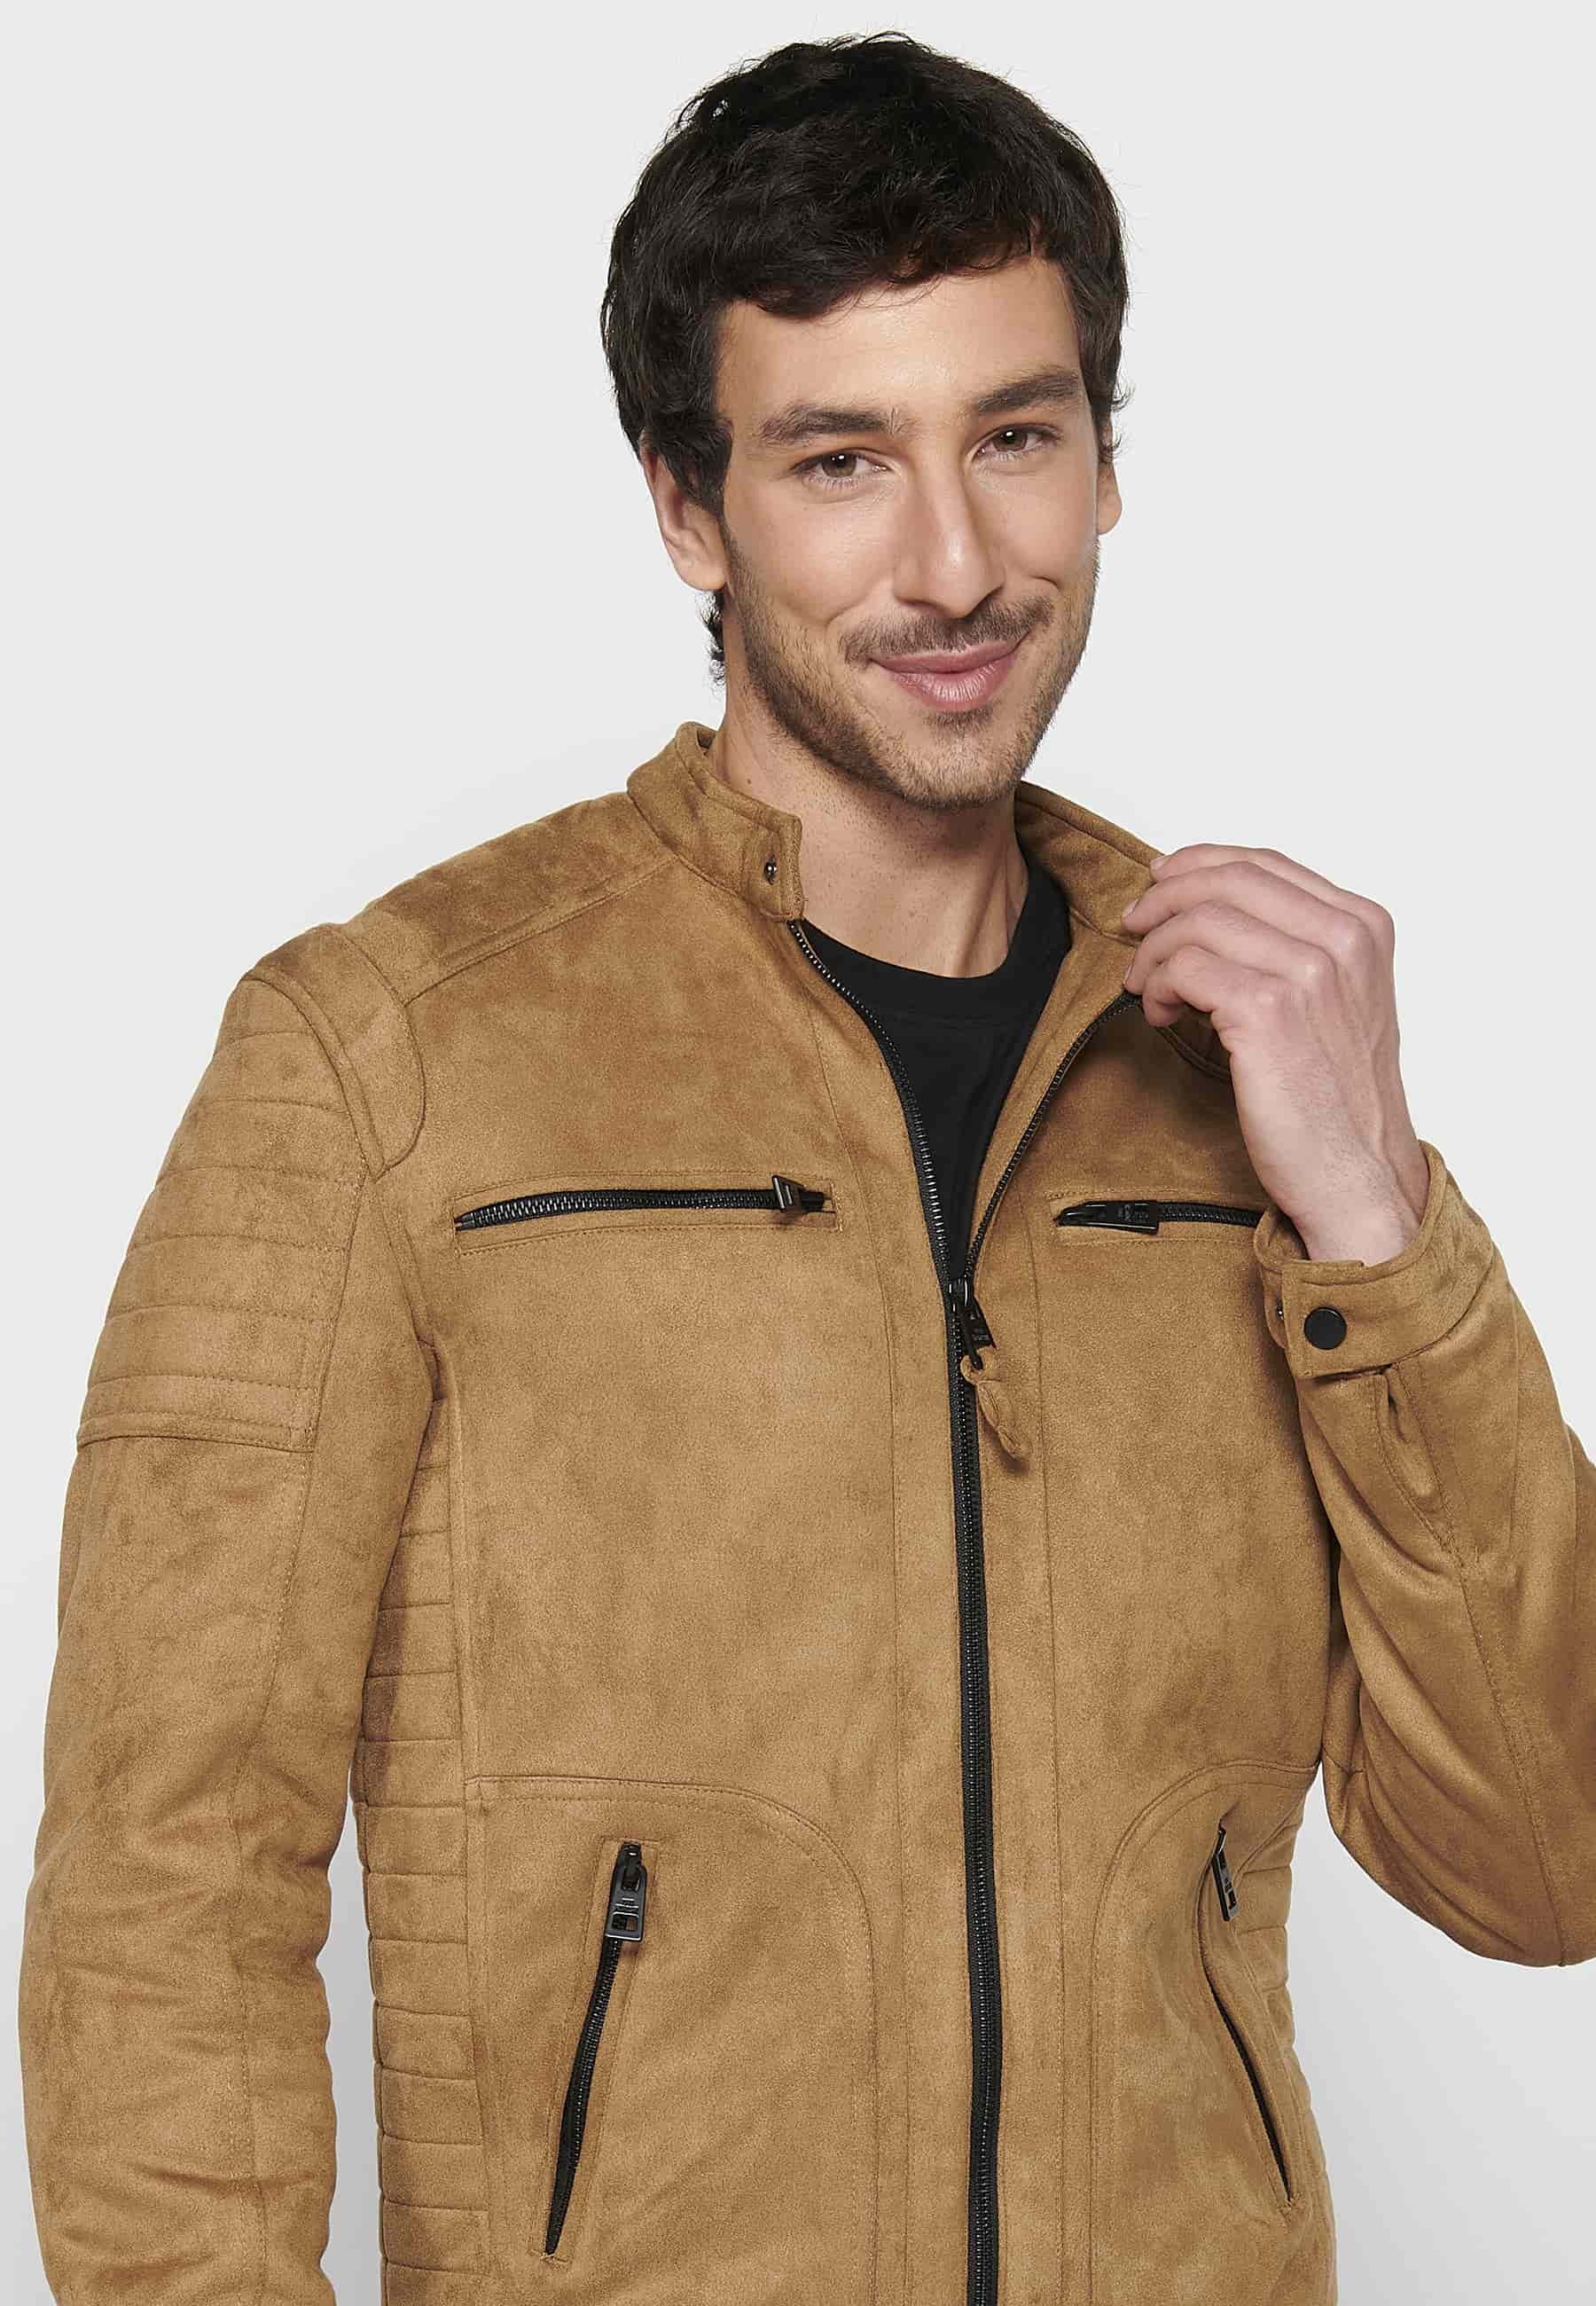 Men's Long Sleeve Jacket with Round Neck and Zipper Front Closure with Four Pockets in Tan Color 4